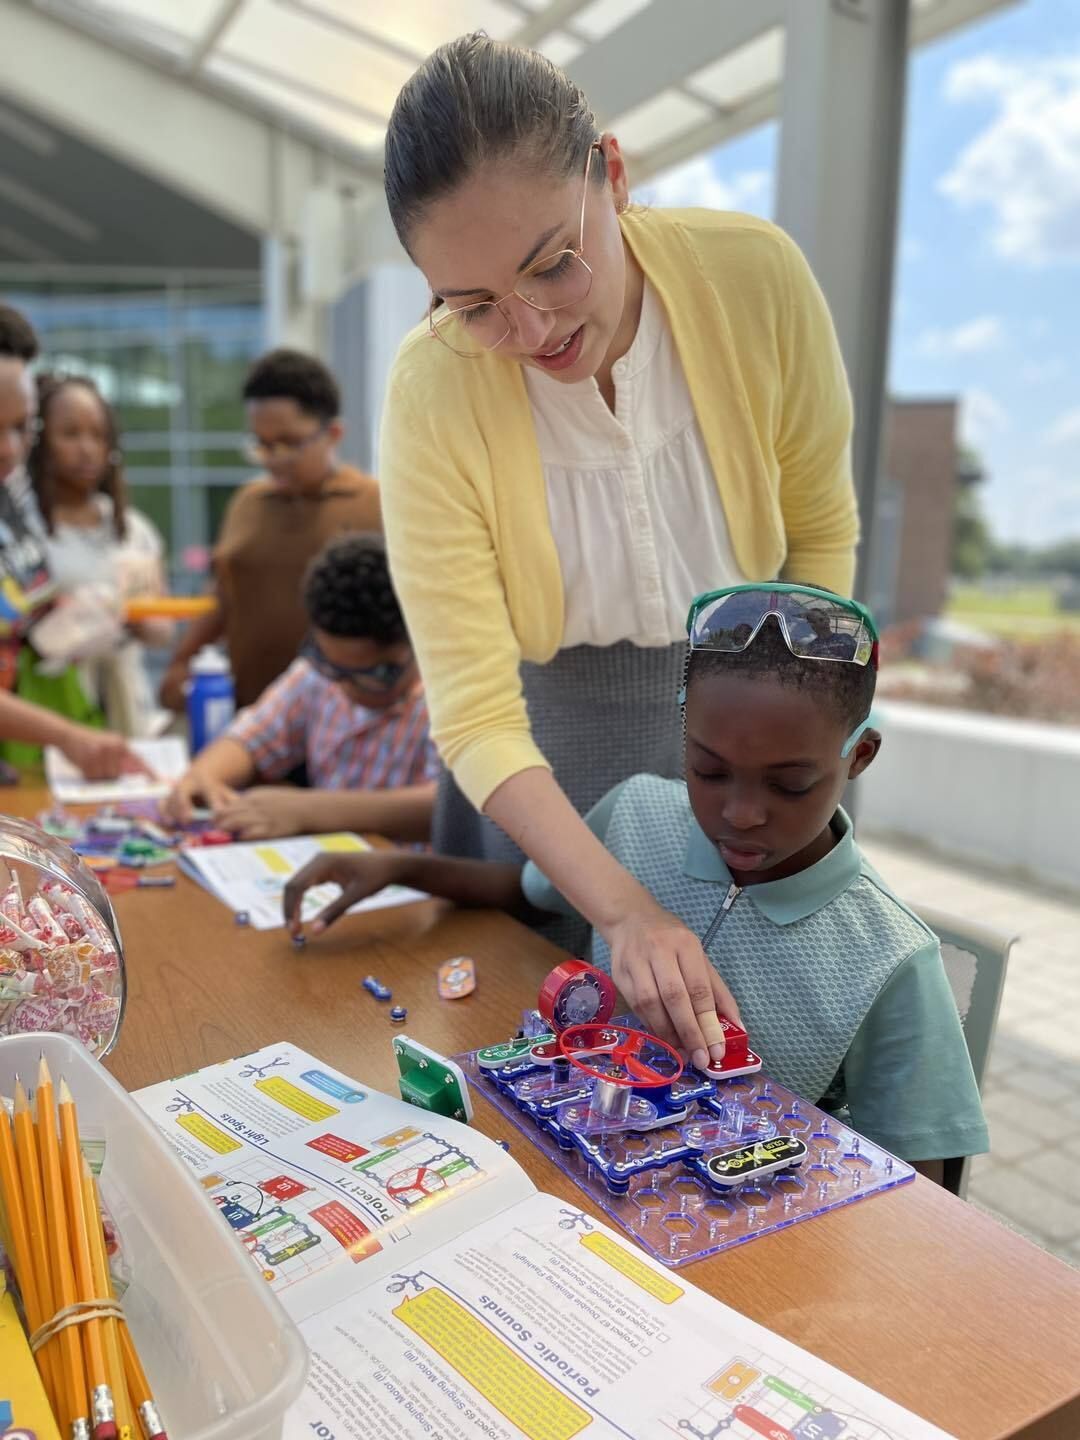 Camila Valenzuela, an AmeriCorps*VISTA who works at the LSU Gordon A. Cain Center for STEM Literacy, guides a student through the fascinating world of snap circuits, sparking curiosity and hands-on learning during the STEM Summer Kick-Off Event